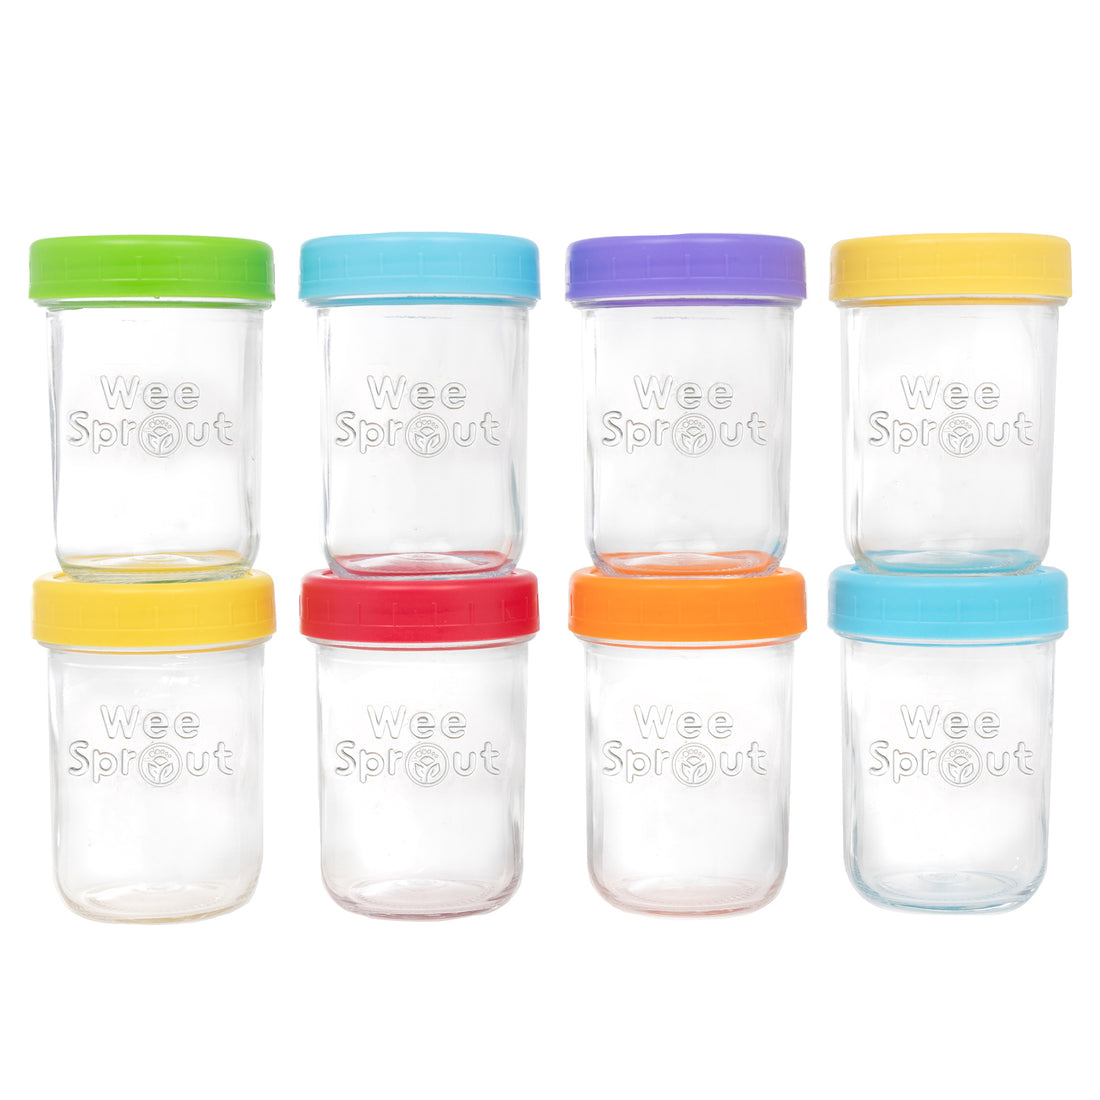 Little Sprout Reusable Stackable Storage Cups with Tray and Dry-erase Marker